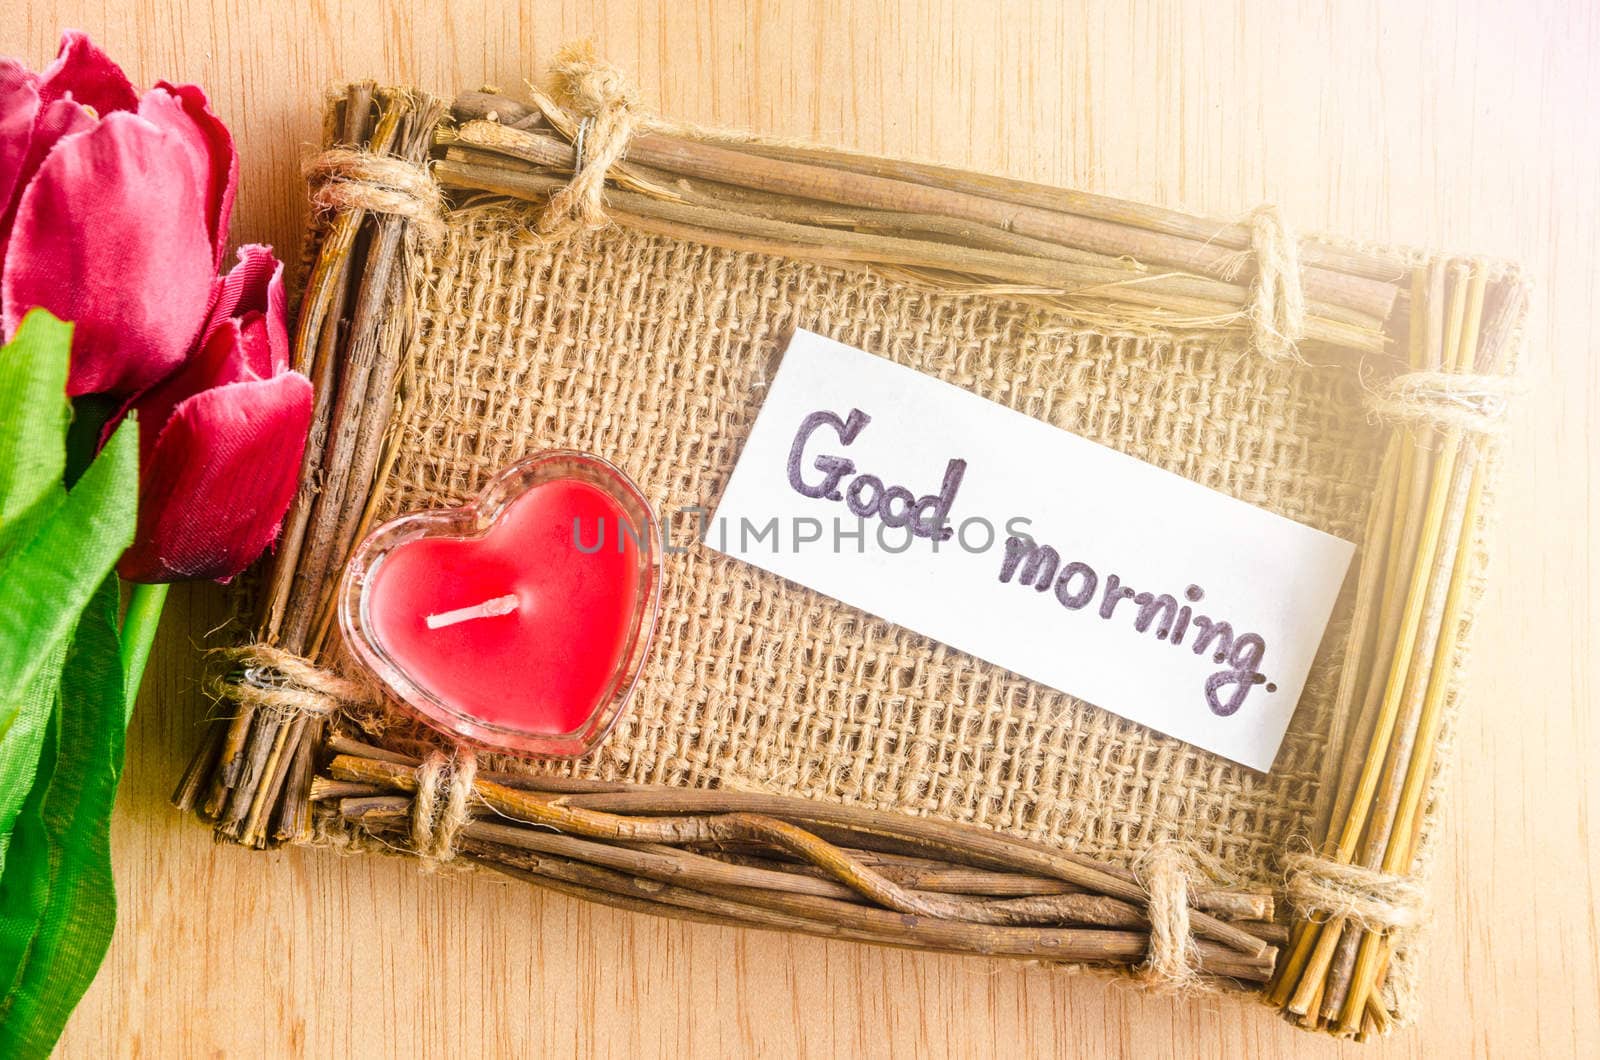 Good morning wording writing and red tulip on wooden background.